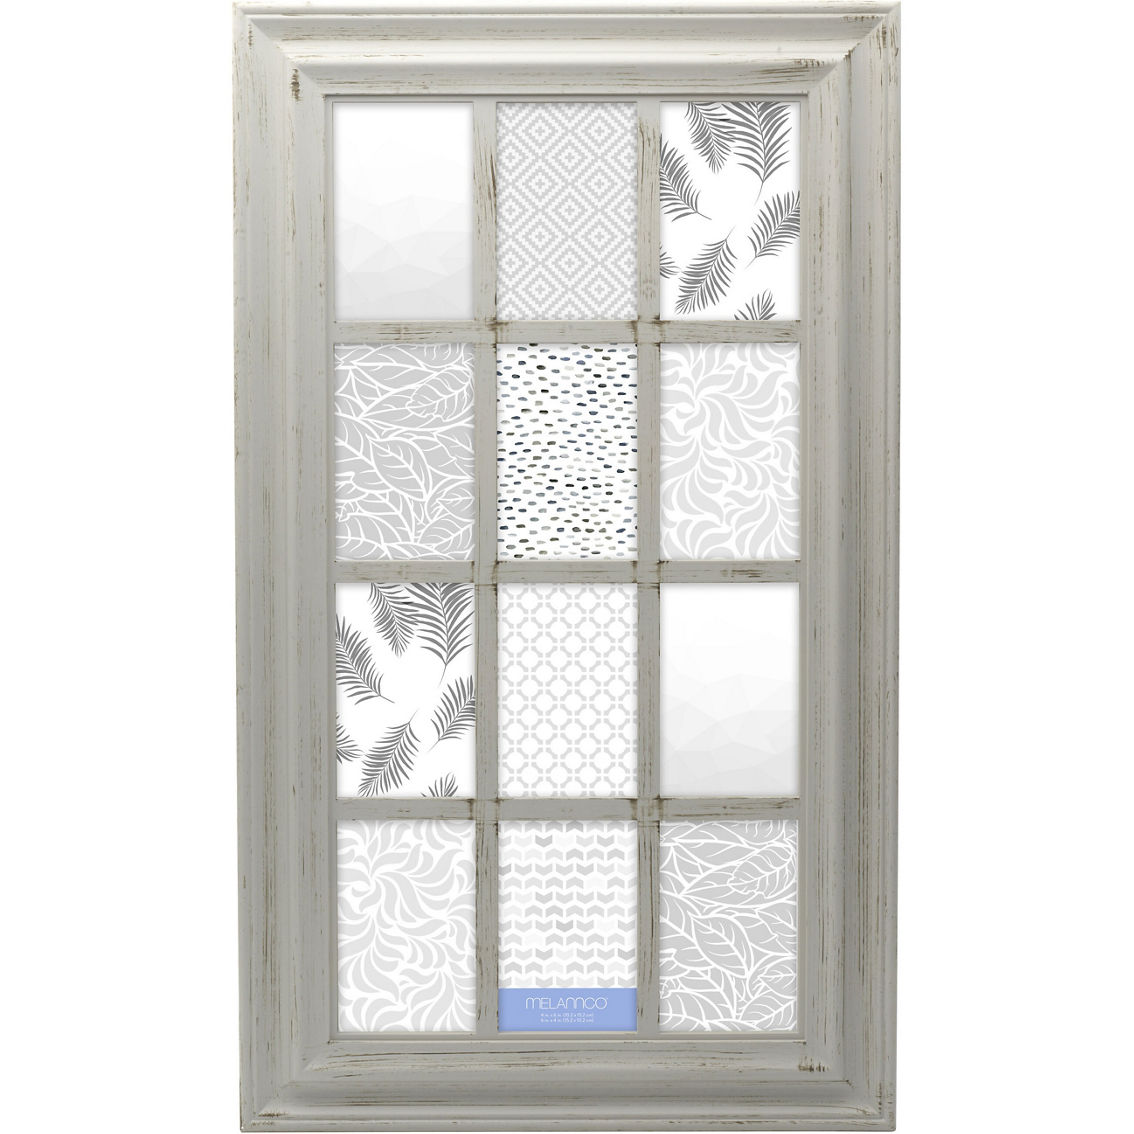 Melannco Distressed Gray 12 Opening Window Collage Wall Frame - Image 4 of 6